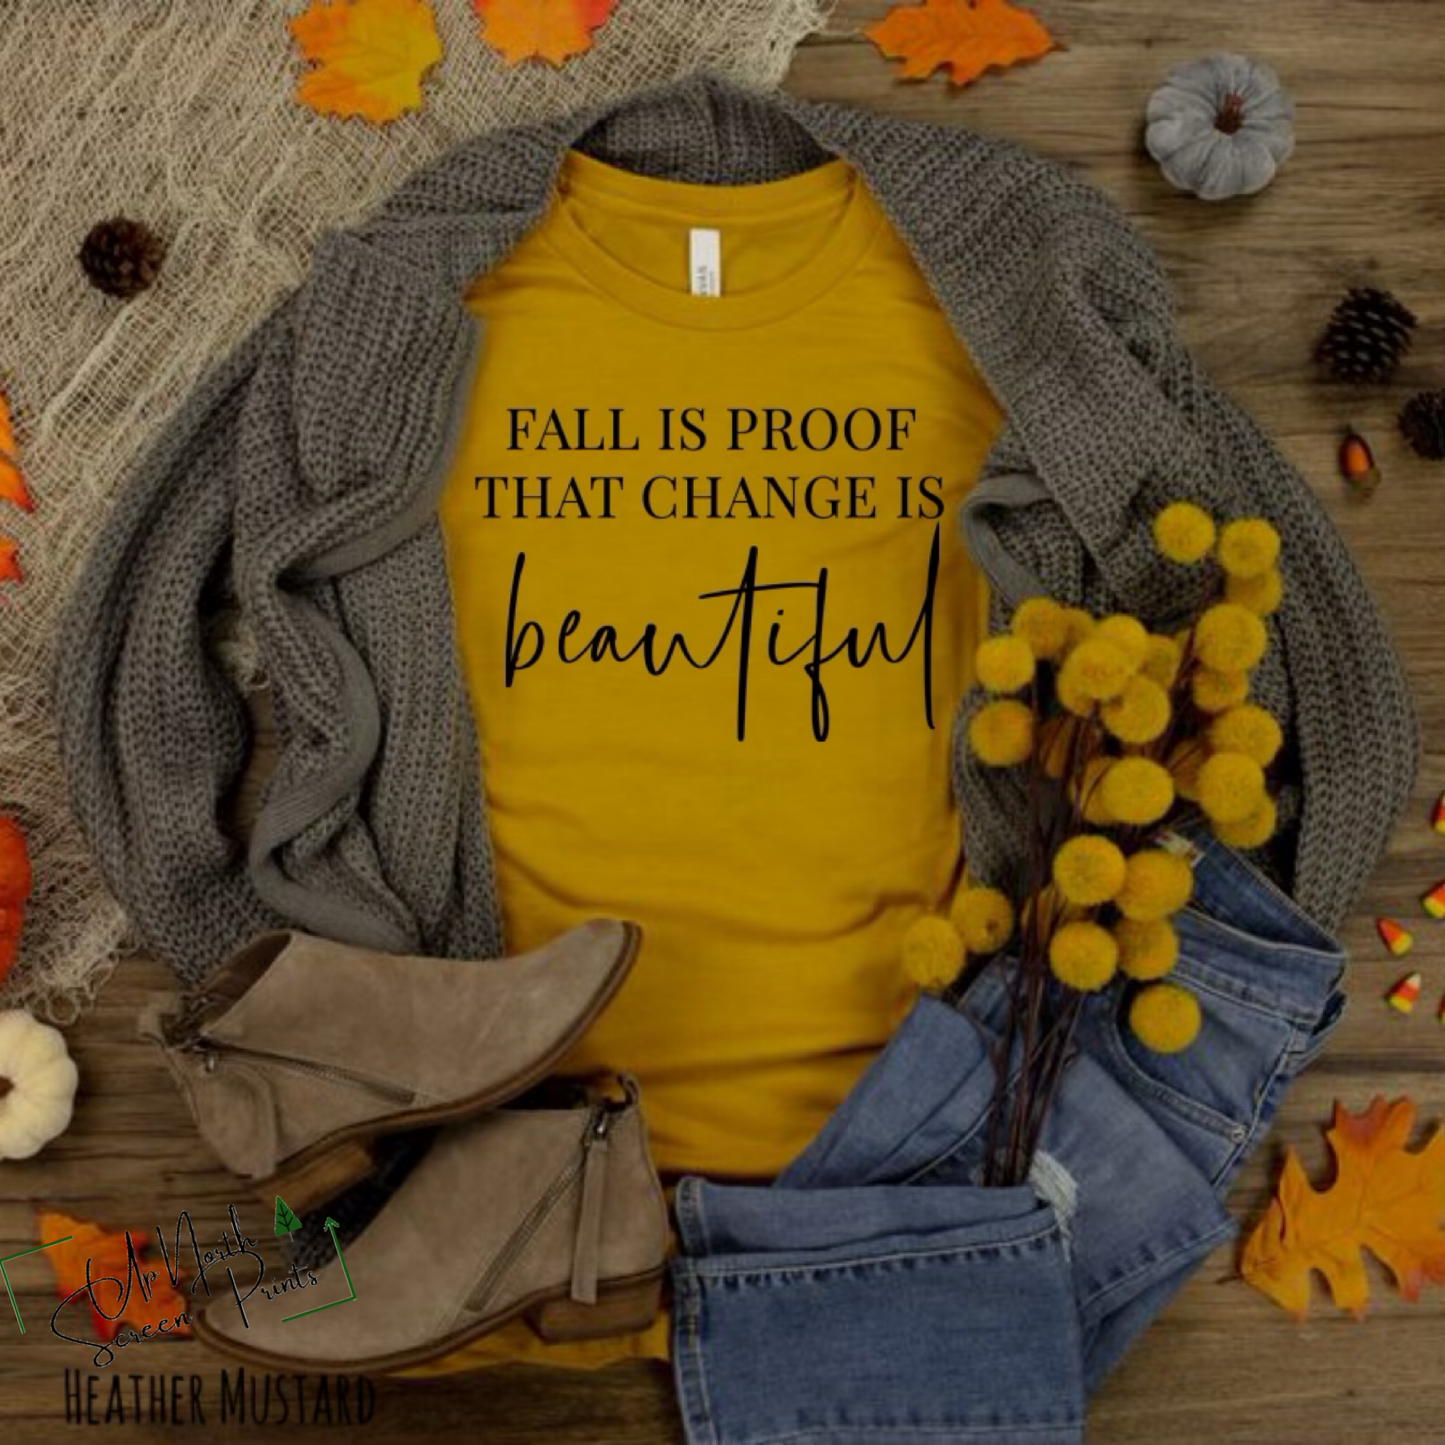 Fall is proof that change is beautiful